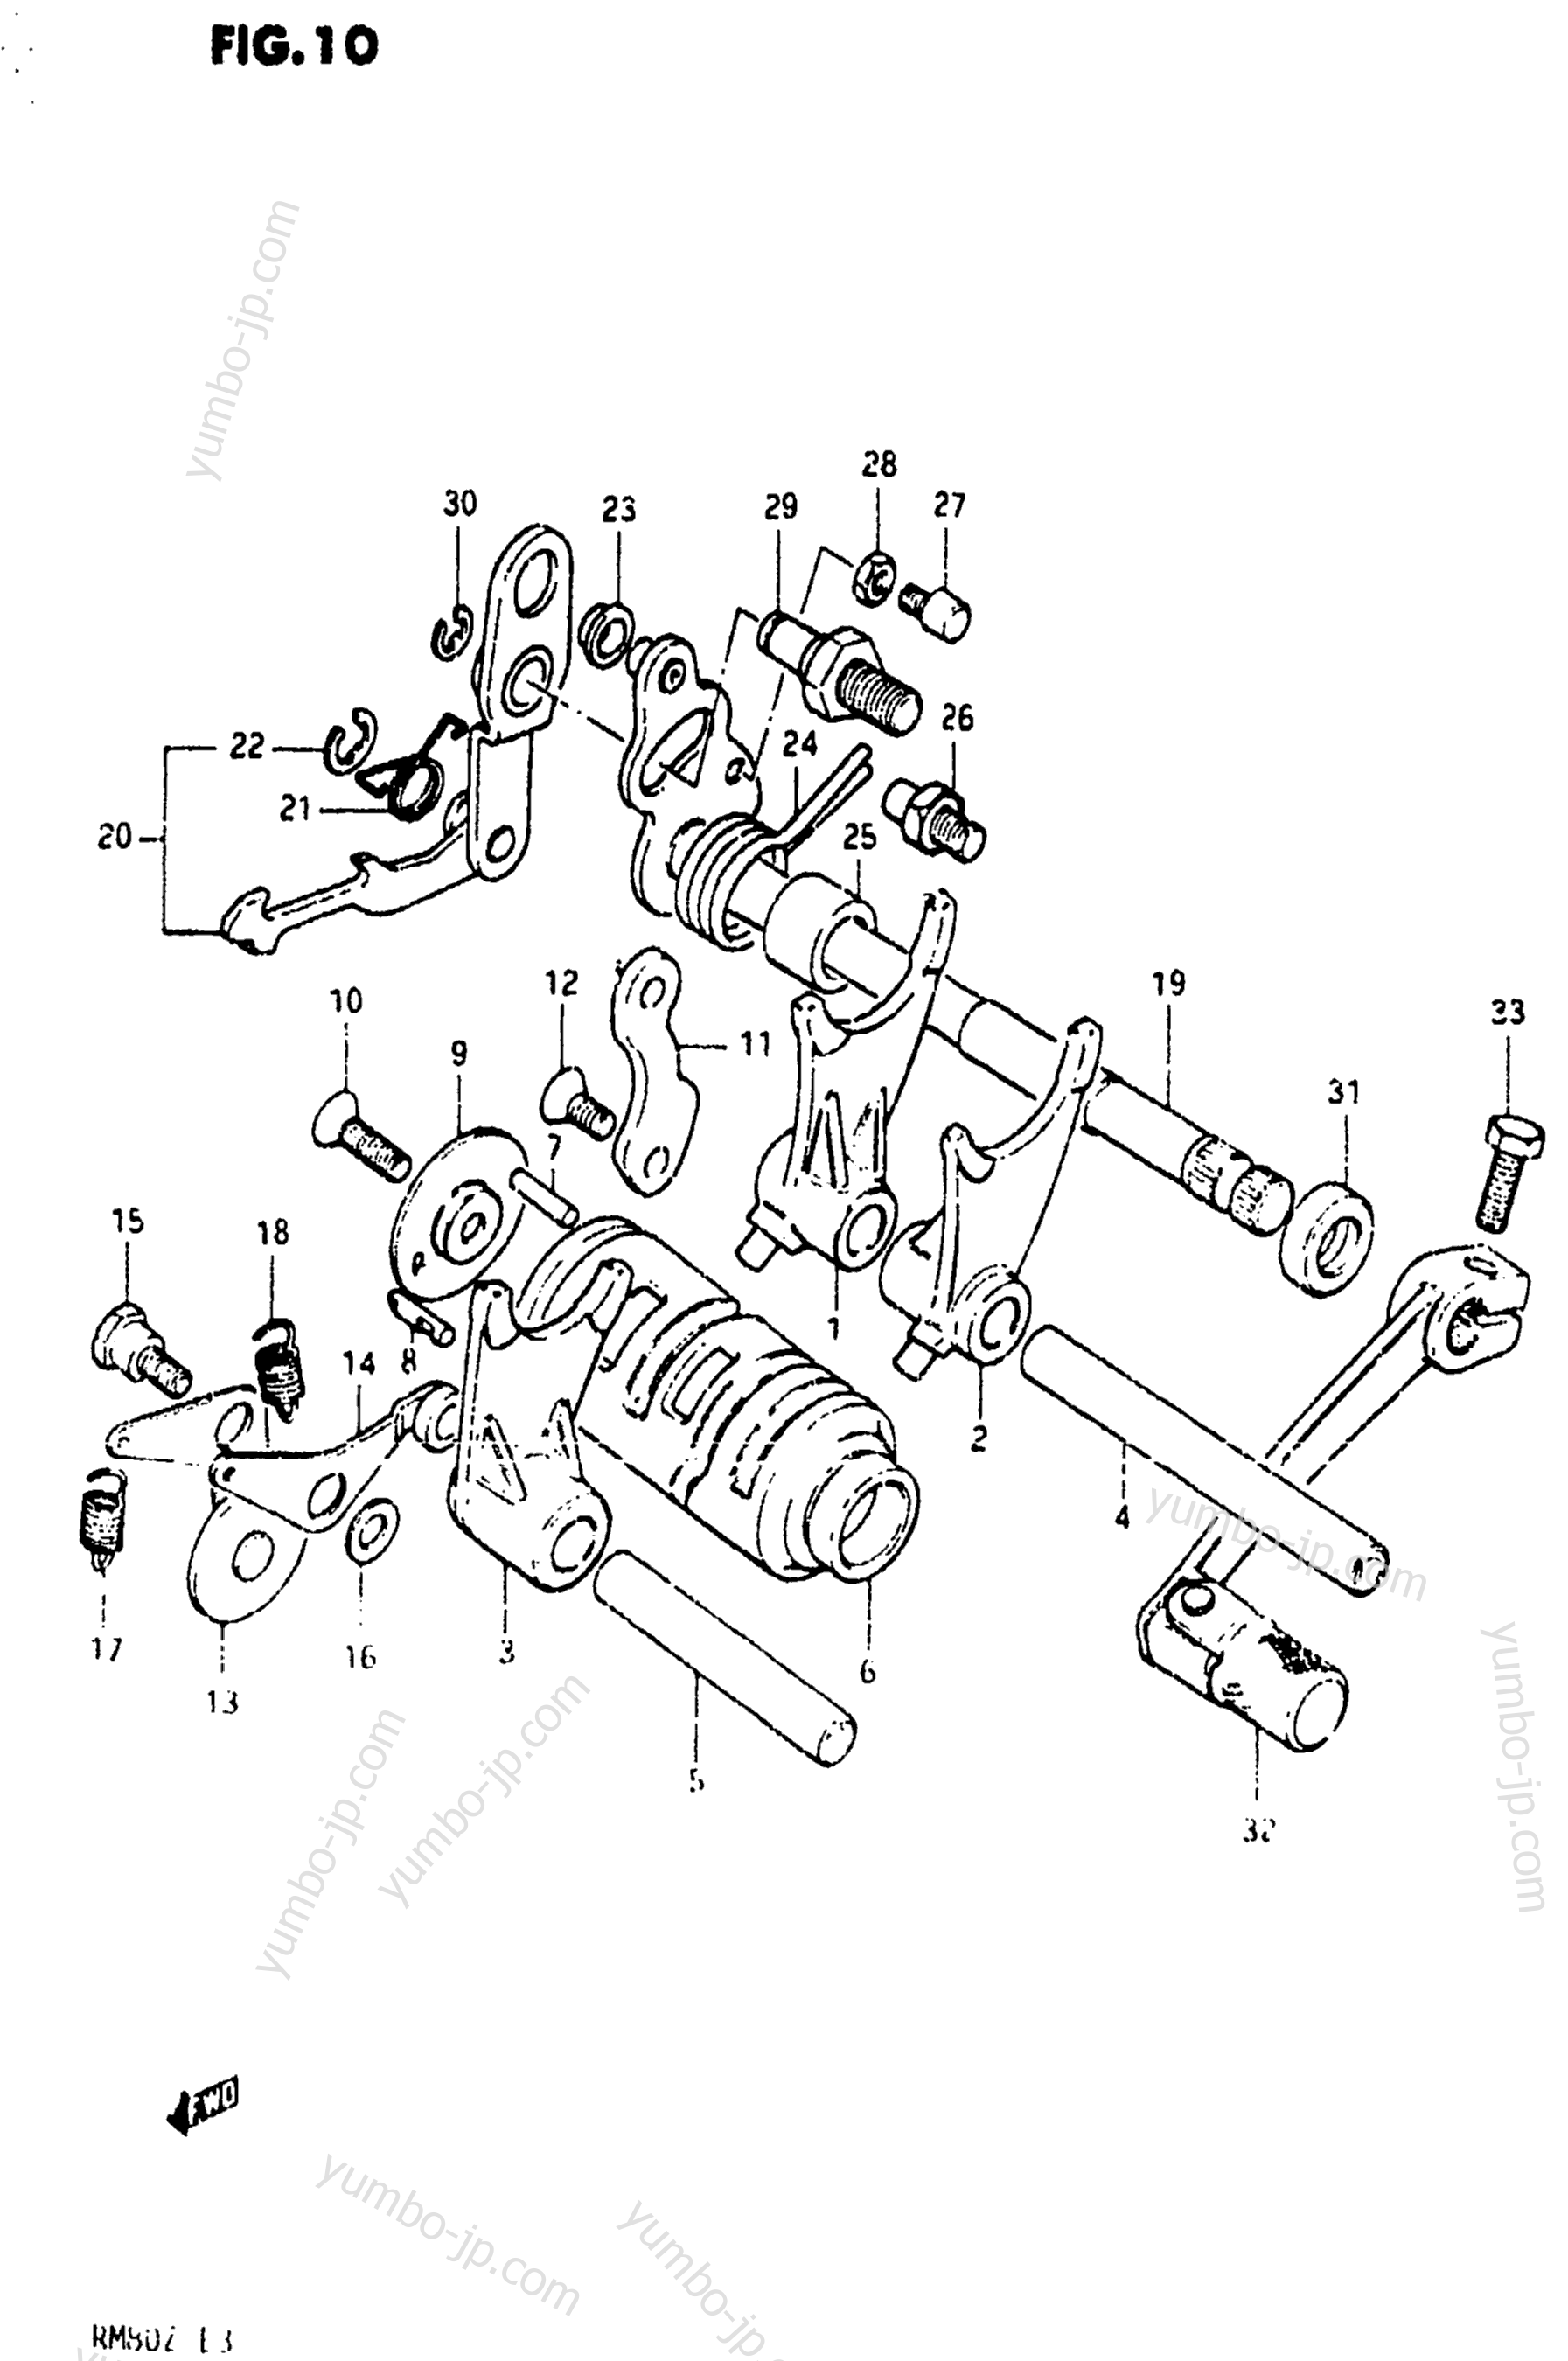 GEAR SHIFTING for motorcycles SUZUKI RM80 1982 year